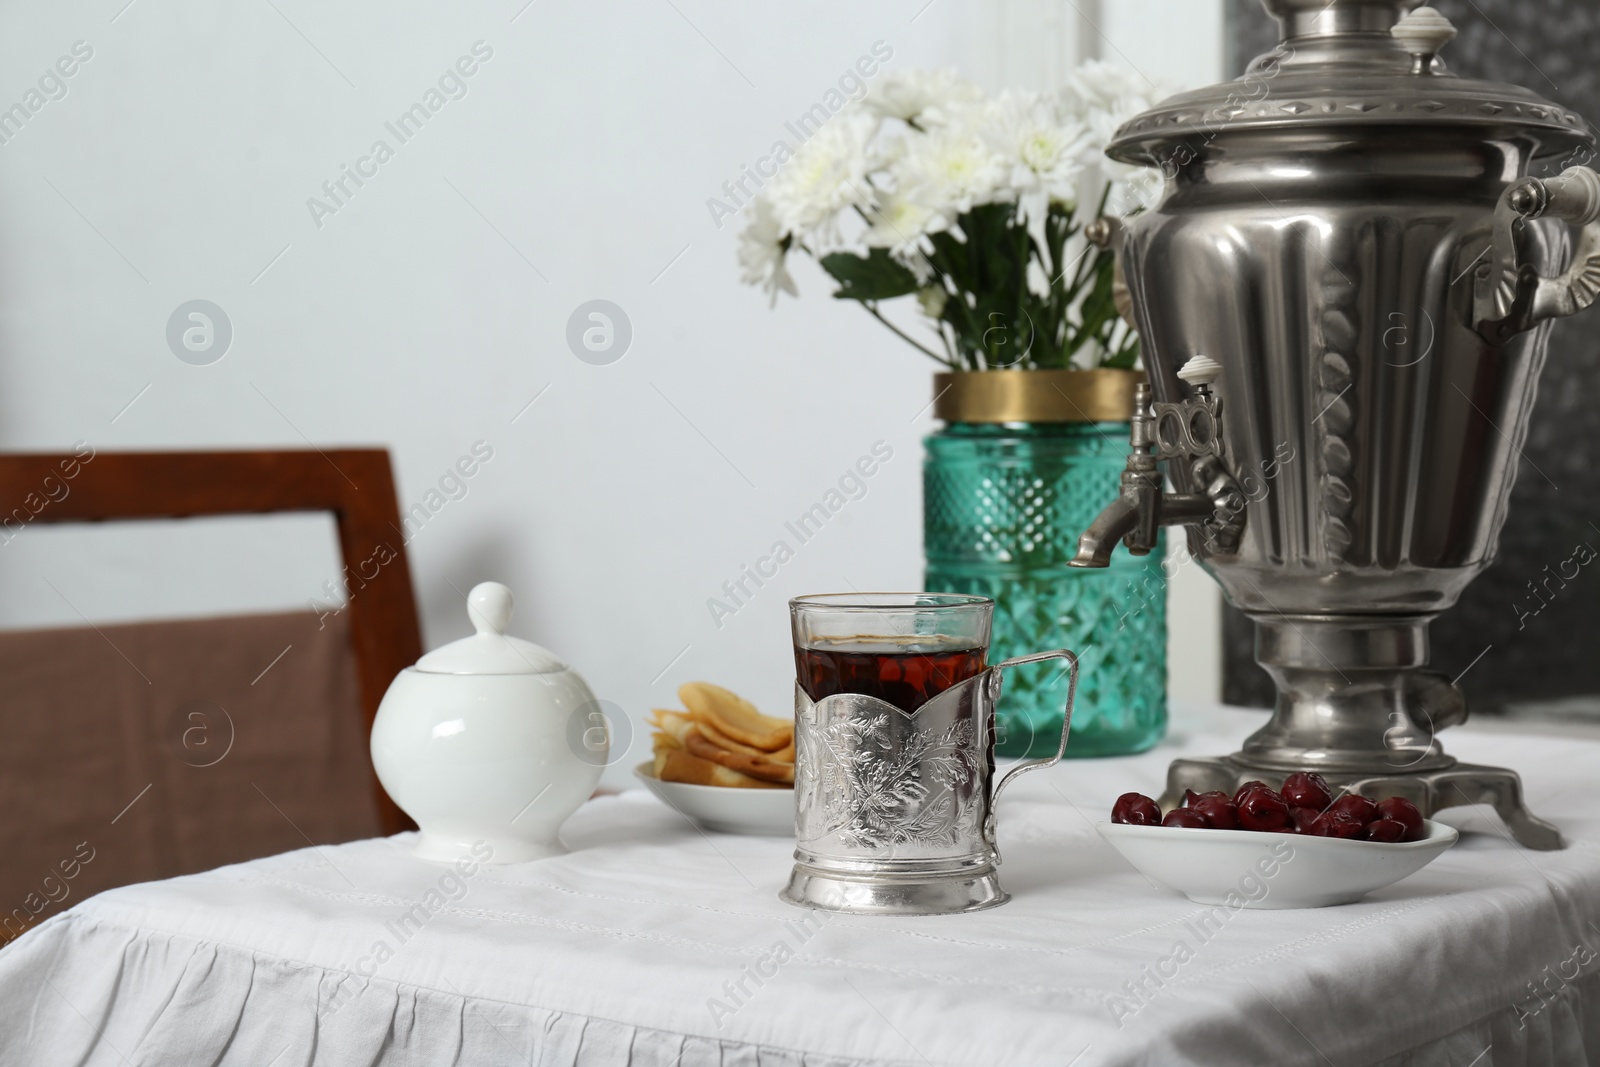 Photo of Traditional Russian samovar, aromatic tea and treats on table indoors